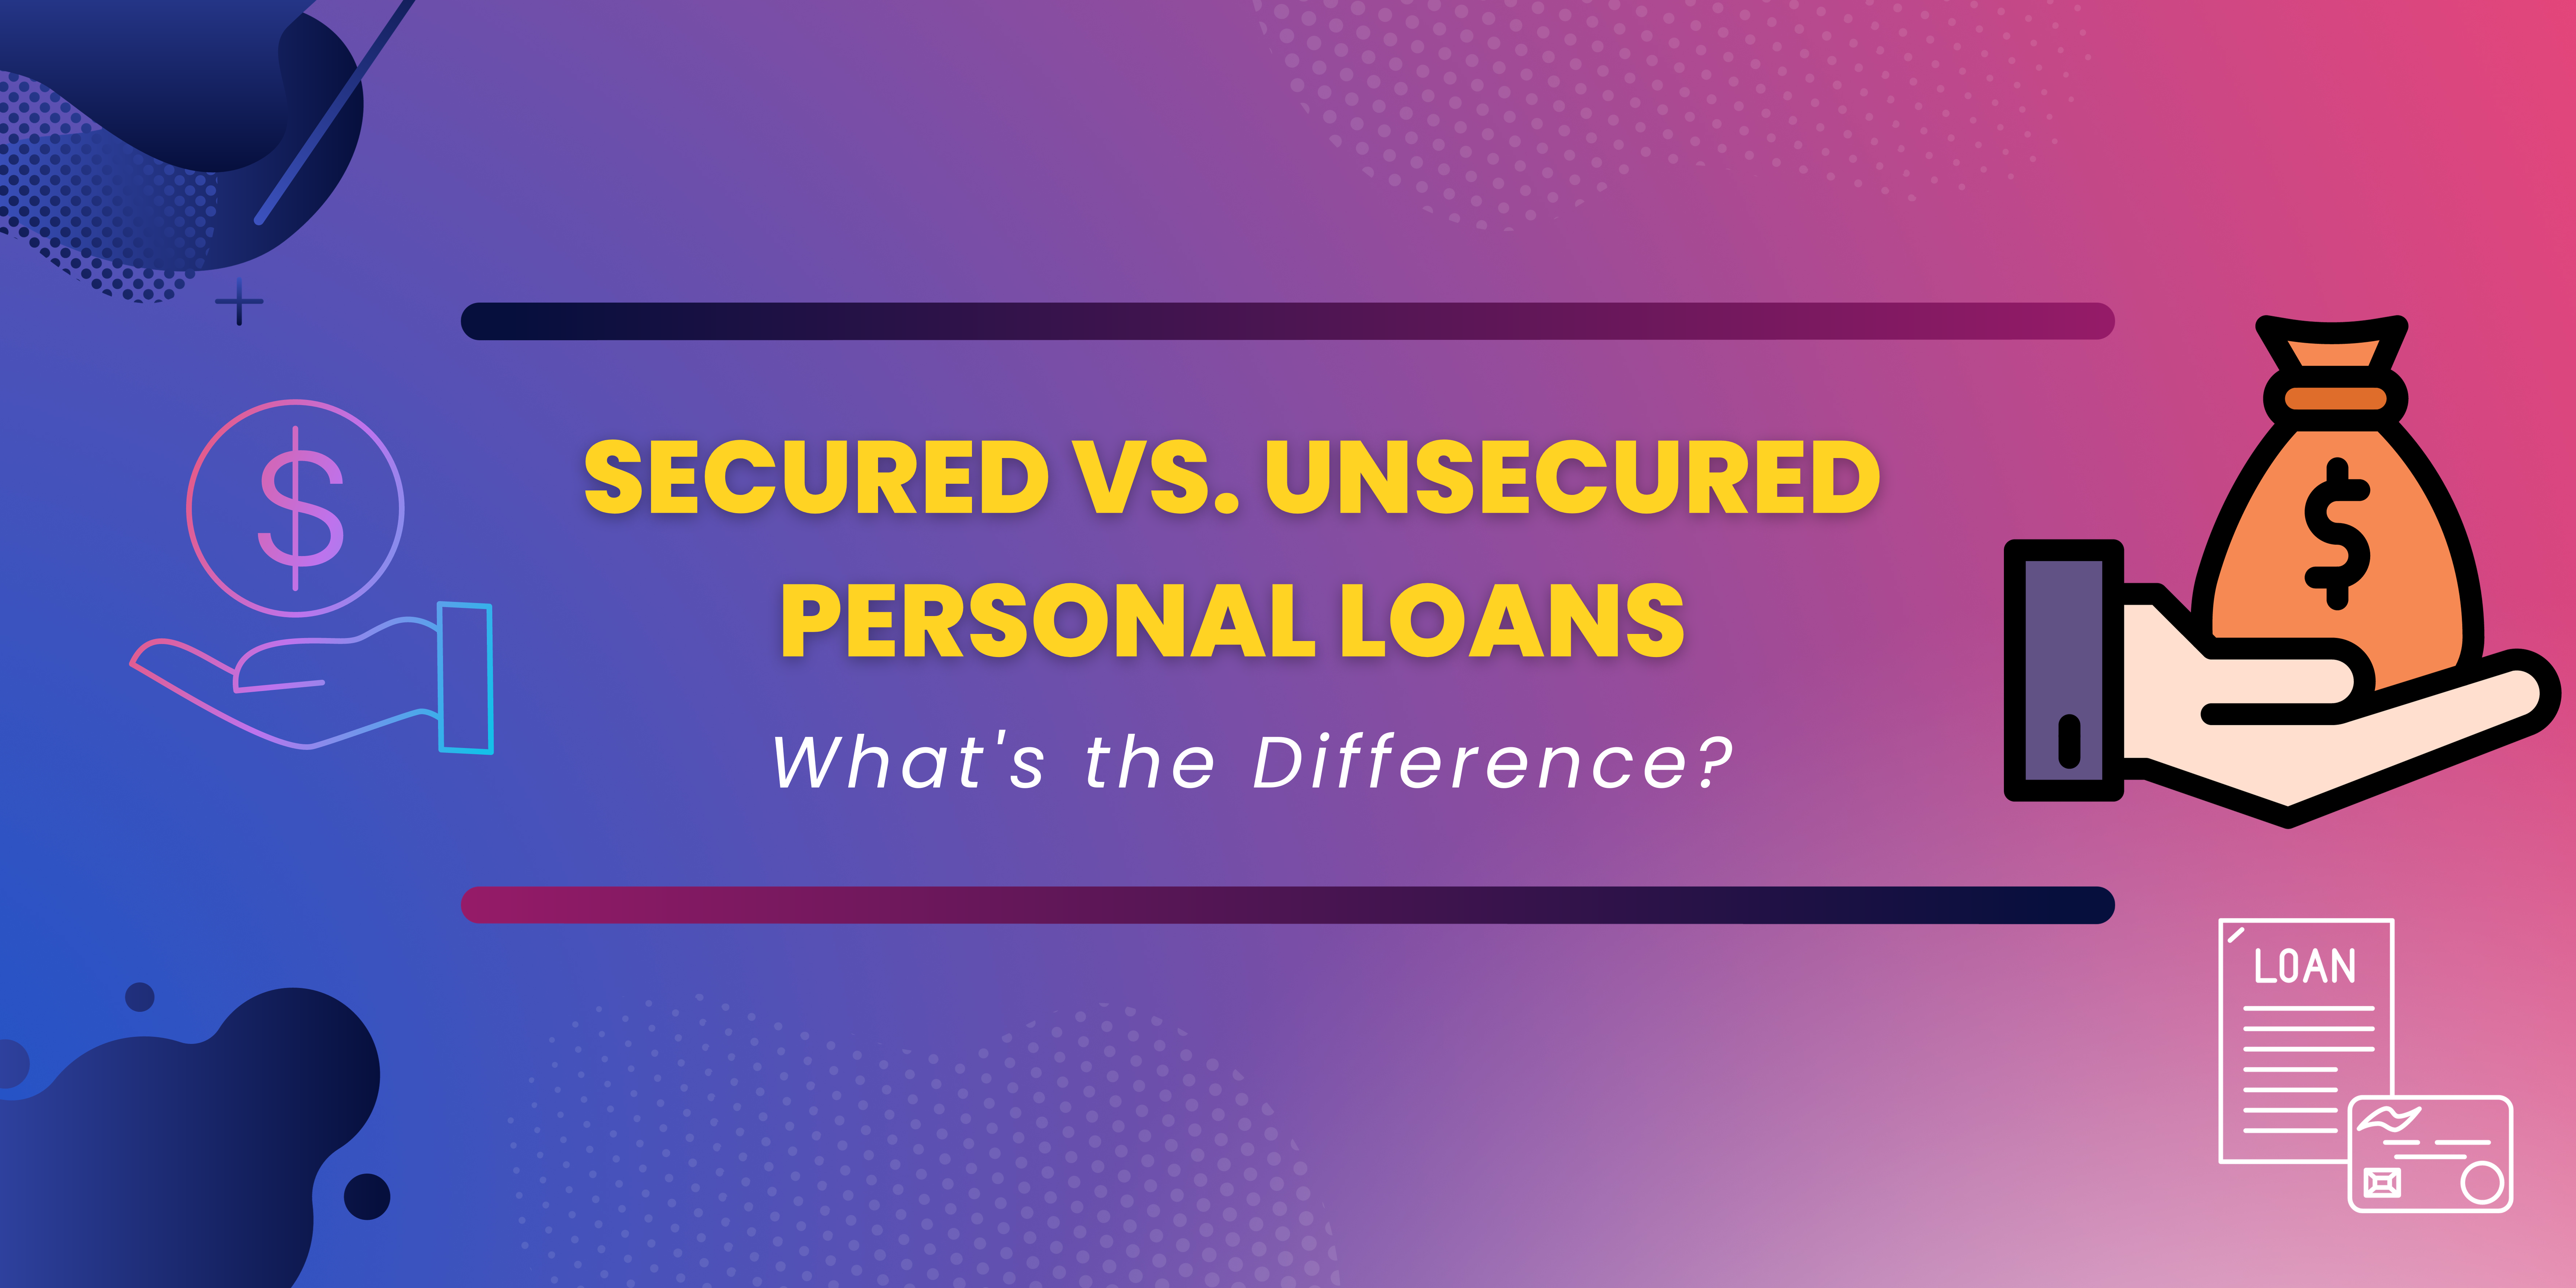 Secured vs. Unsecured Personal Loans: What's the Difference?